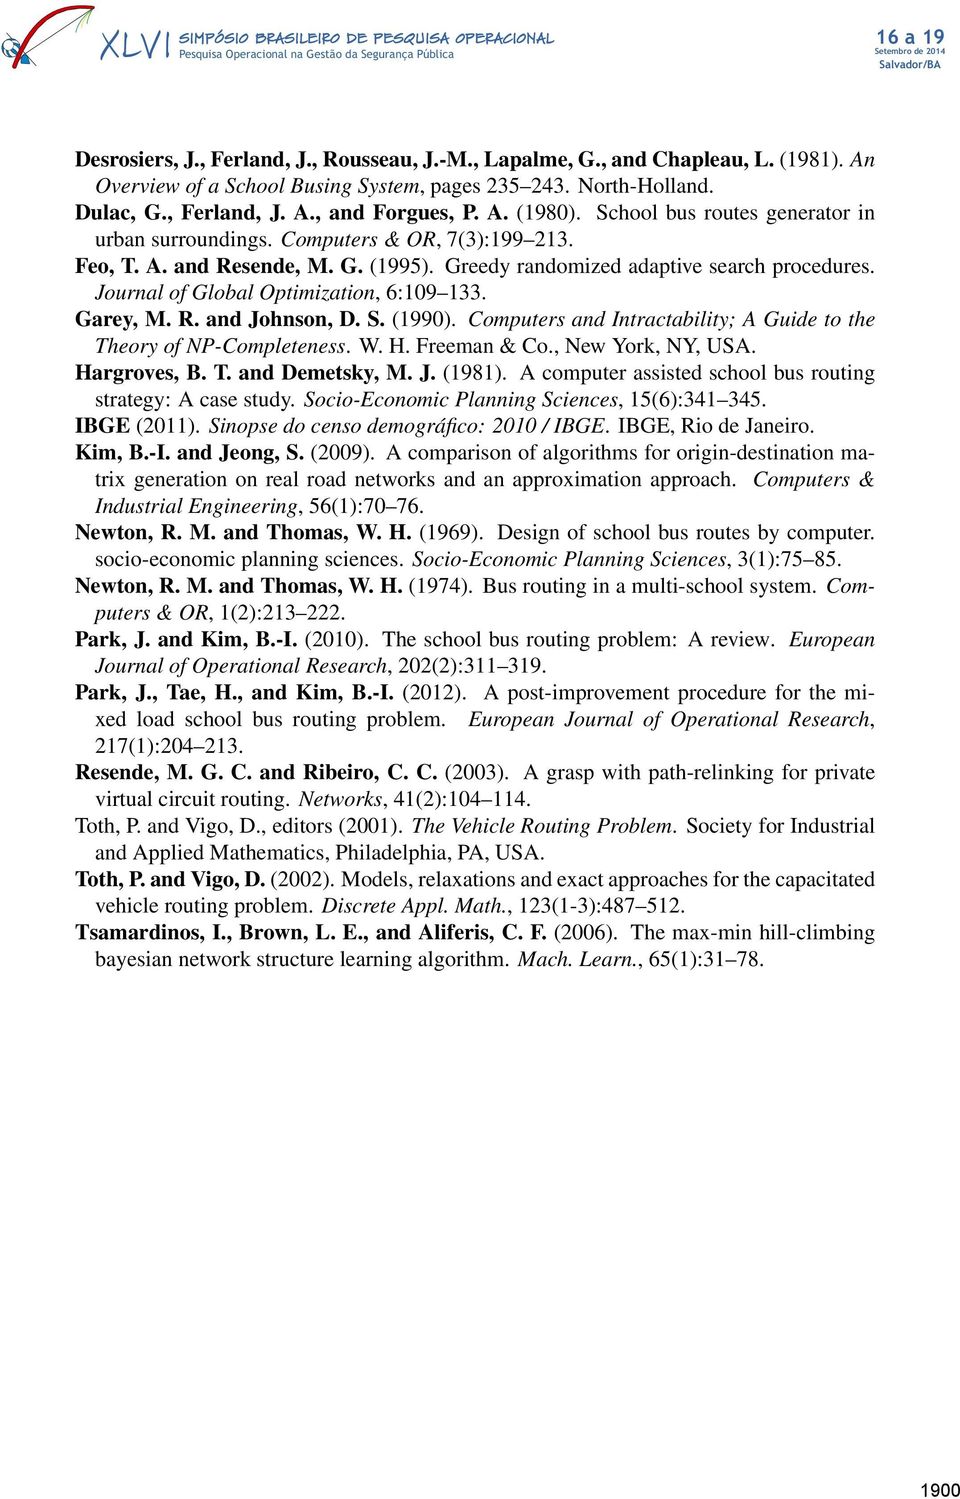 Journal of Global Optimization, 6:109 133. Garey, M. R. and Johnson, D. S. (1990). Computers and Intractability; A Guide to the Theory of NP-Completeness. W. H. Freeman & Co., New York, NY, USA.